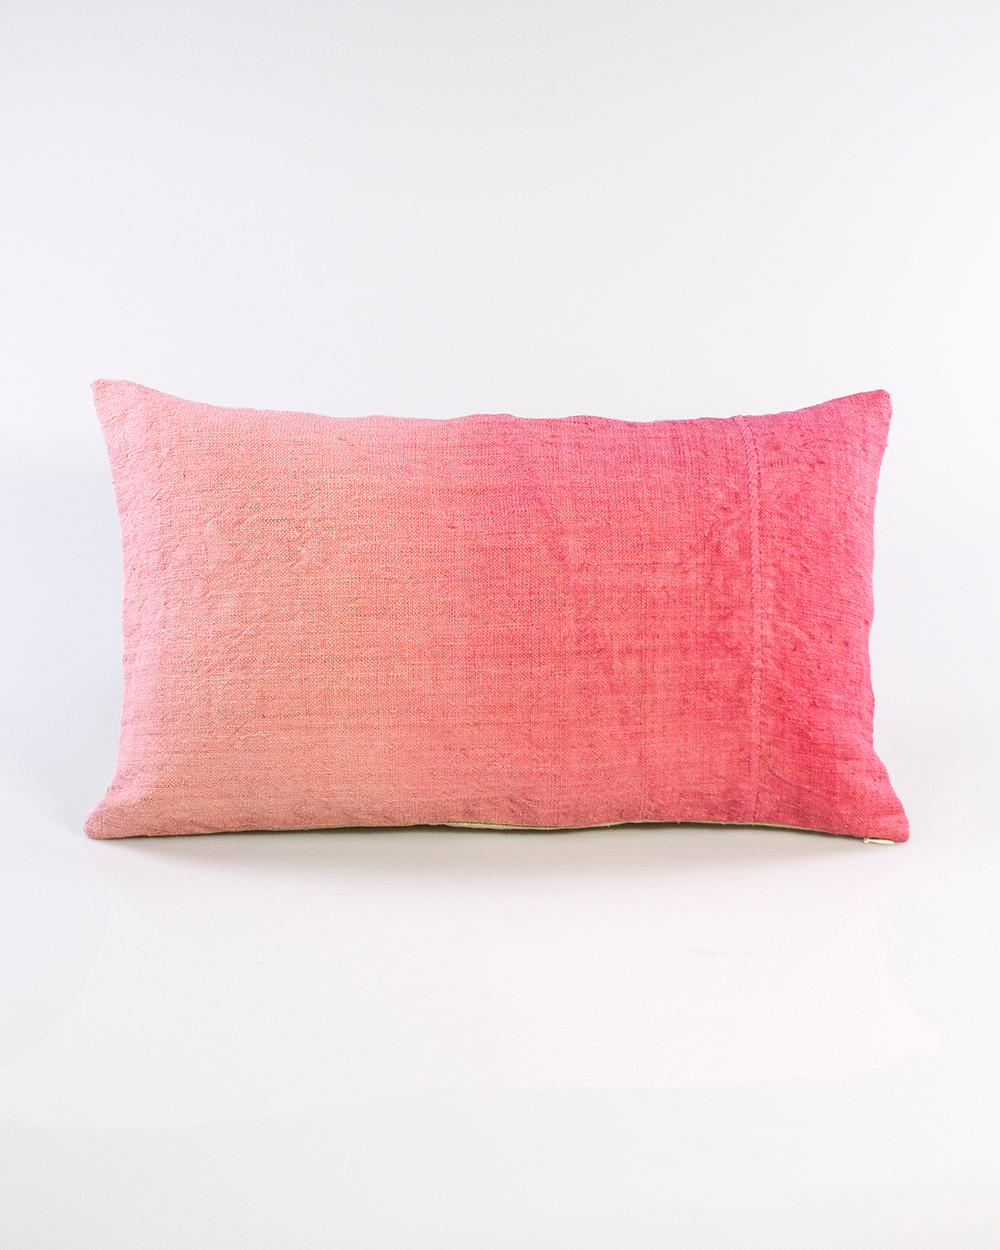 Spanish Espanyolet Pink Ombre Hand-Painted Vintage Linen Pillow 12